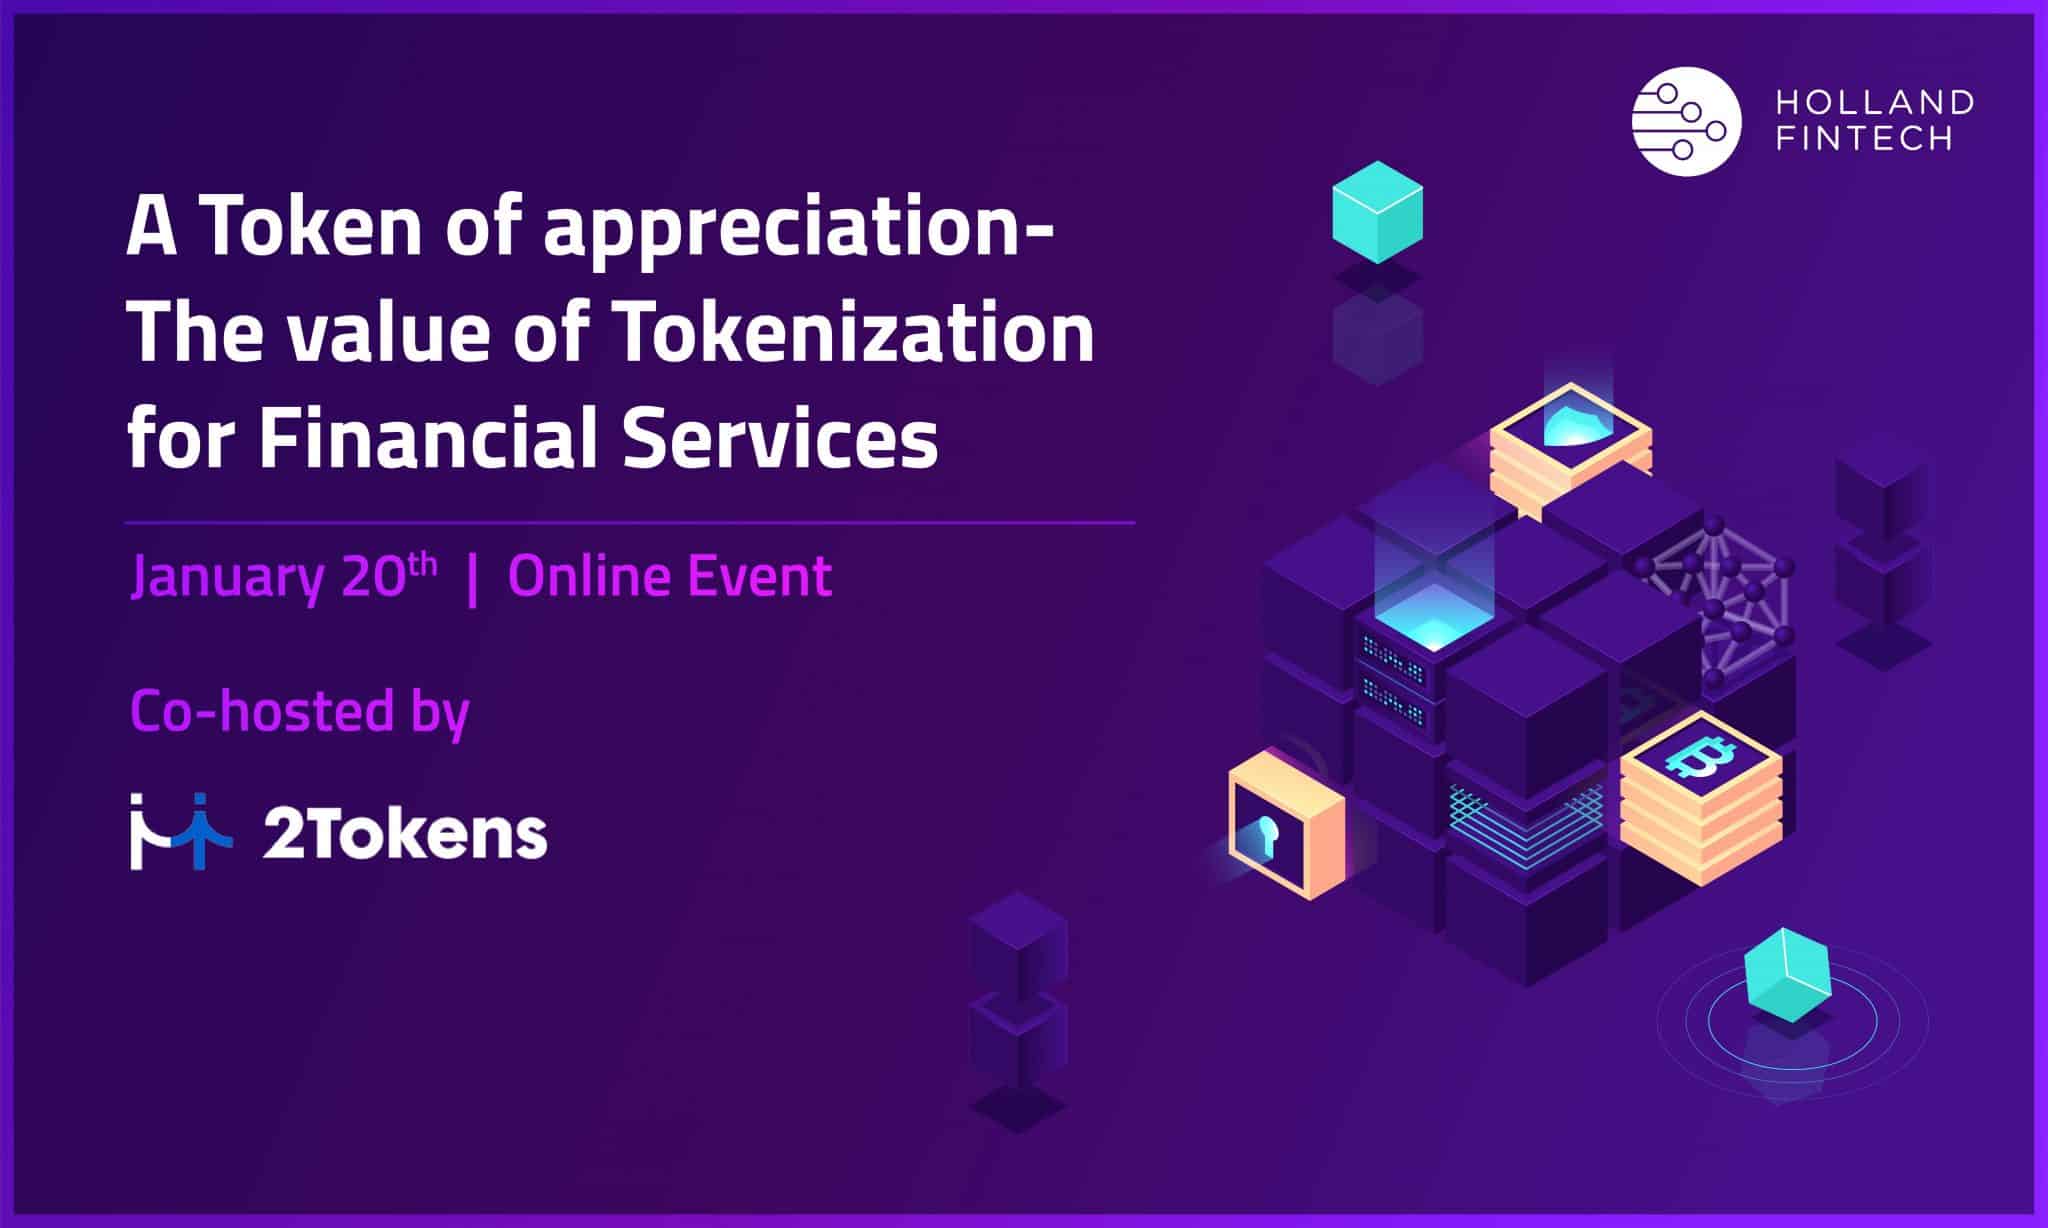 A Token of appreciation - The value of Tokenization for Financial Services